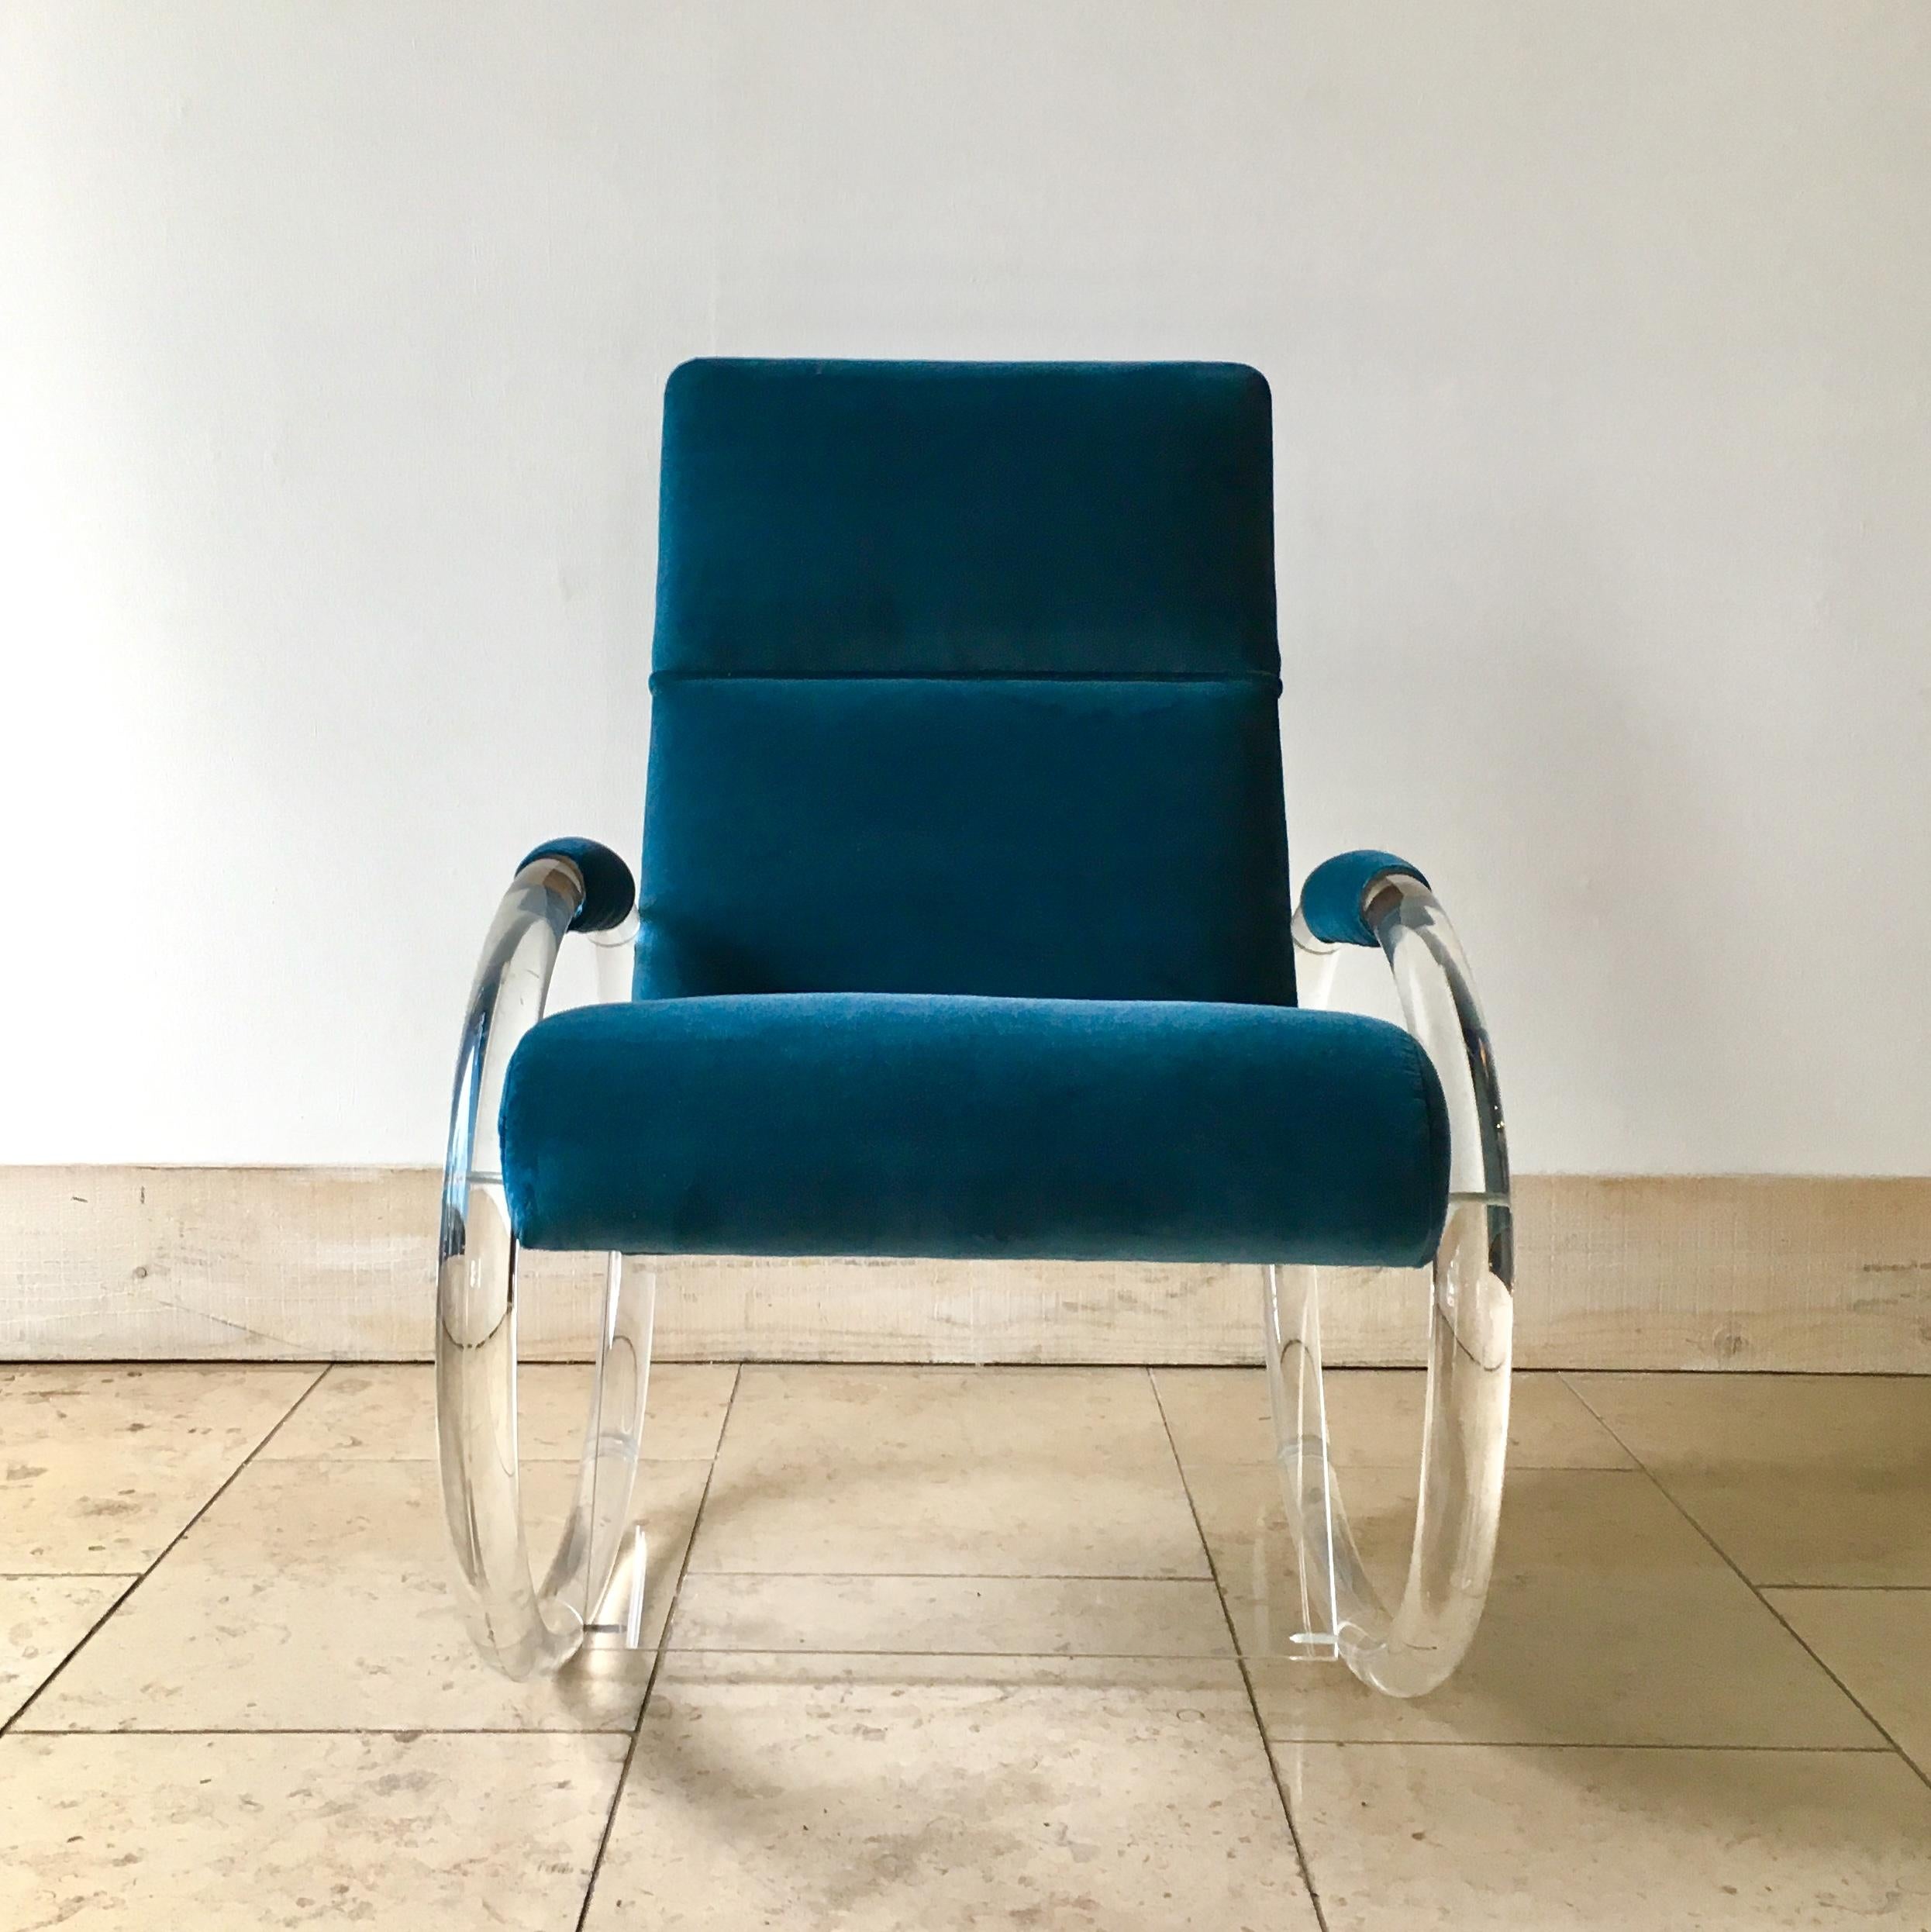 A Charles Hollis Jones designed lucite framed rocking chair 1970s.

Reupholstered by our team in a peacock blue velvet .